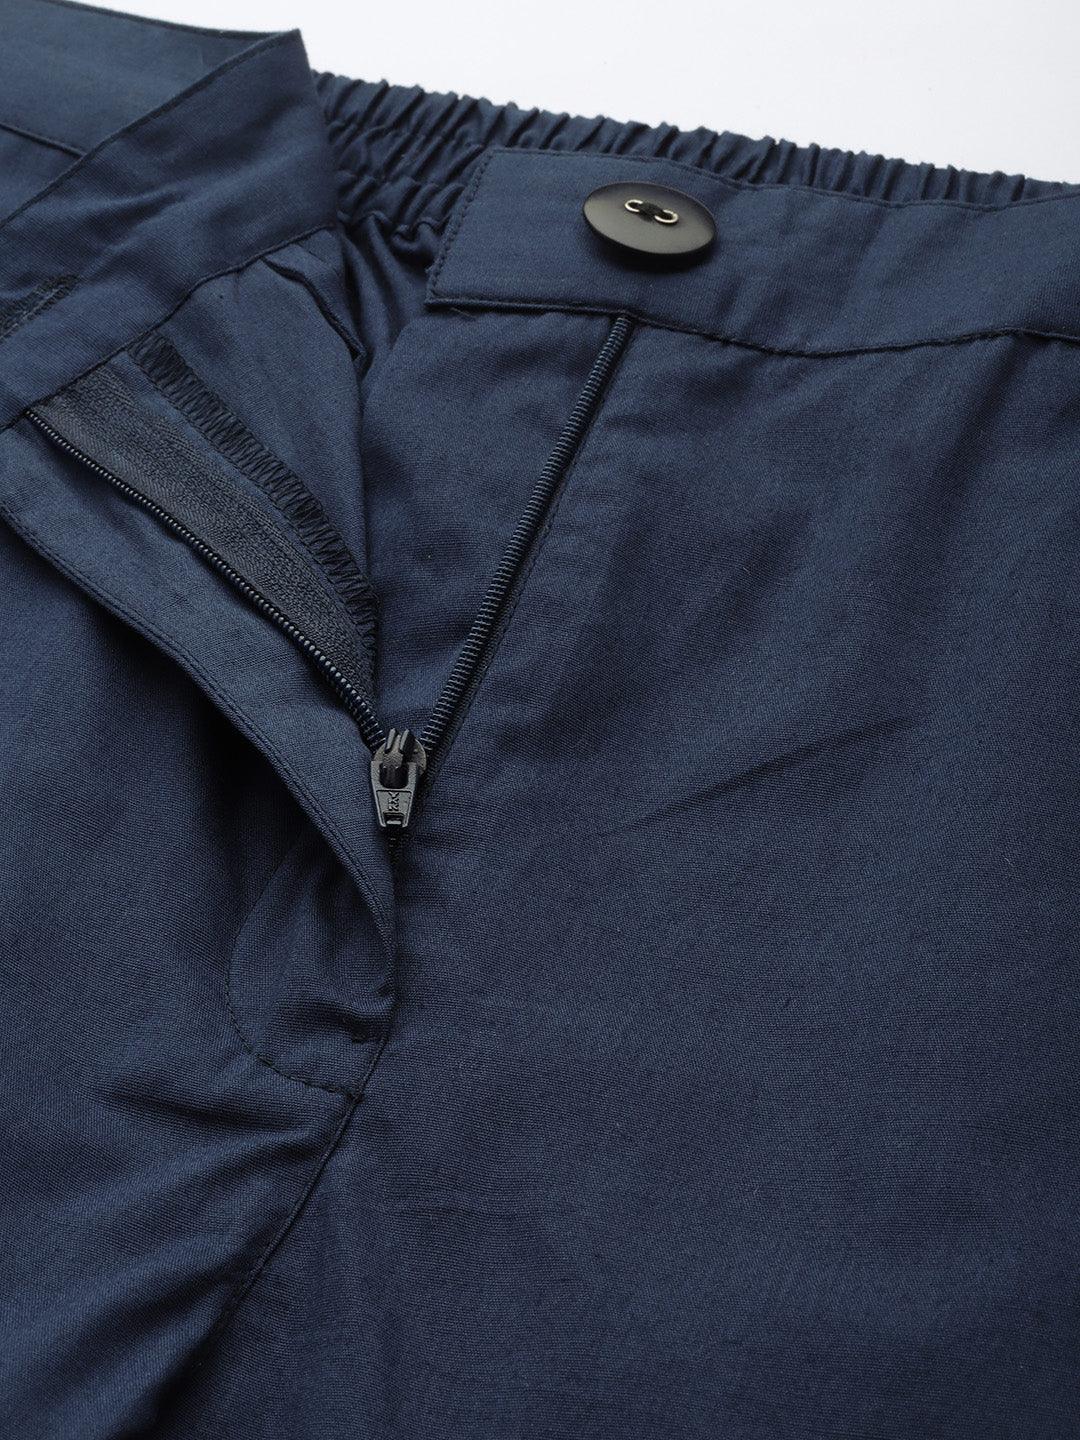 Navy Blue Solid Cotton Trousers